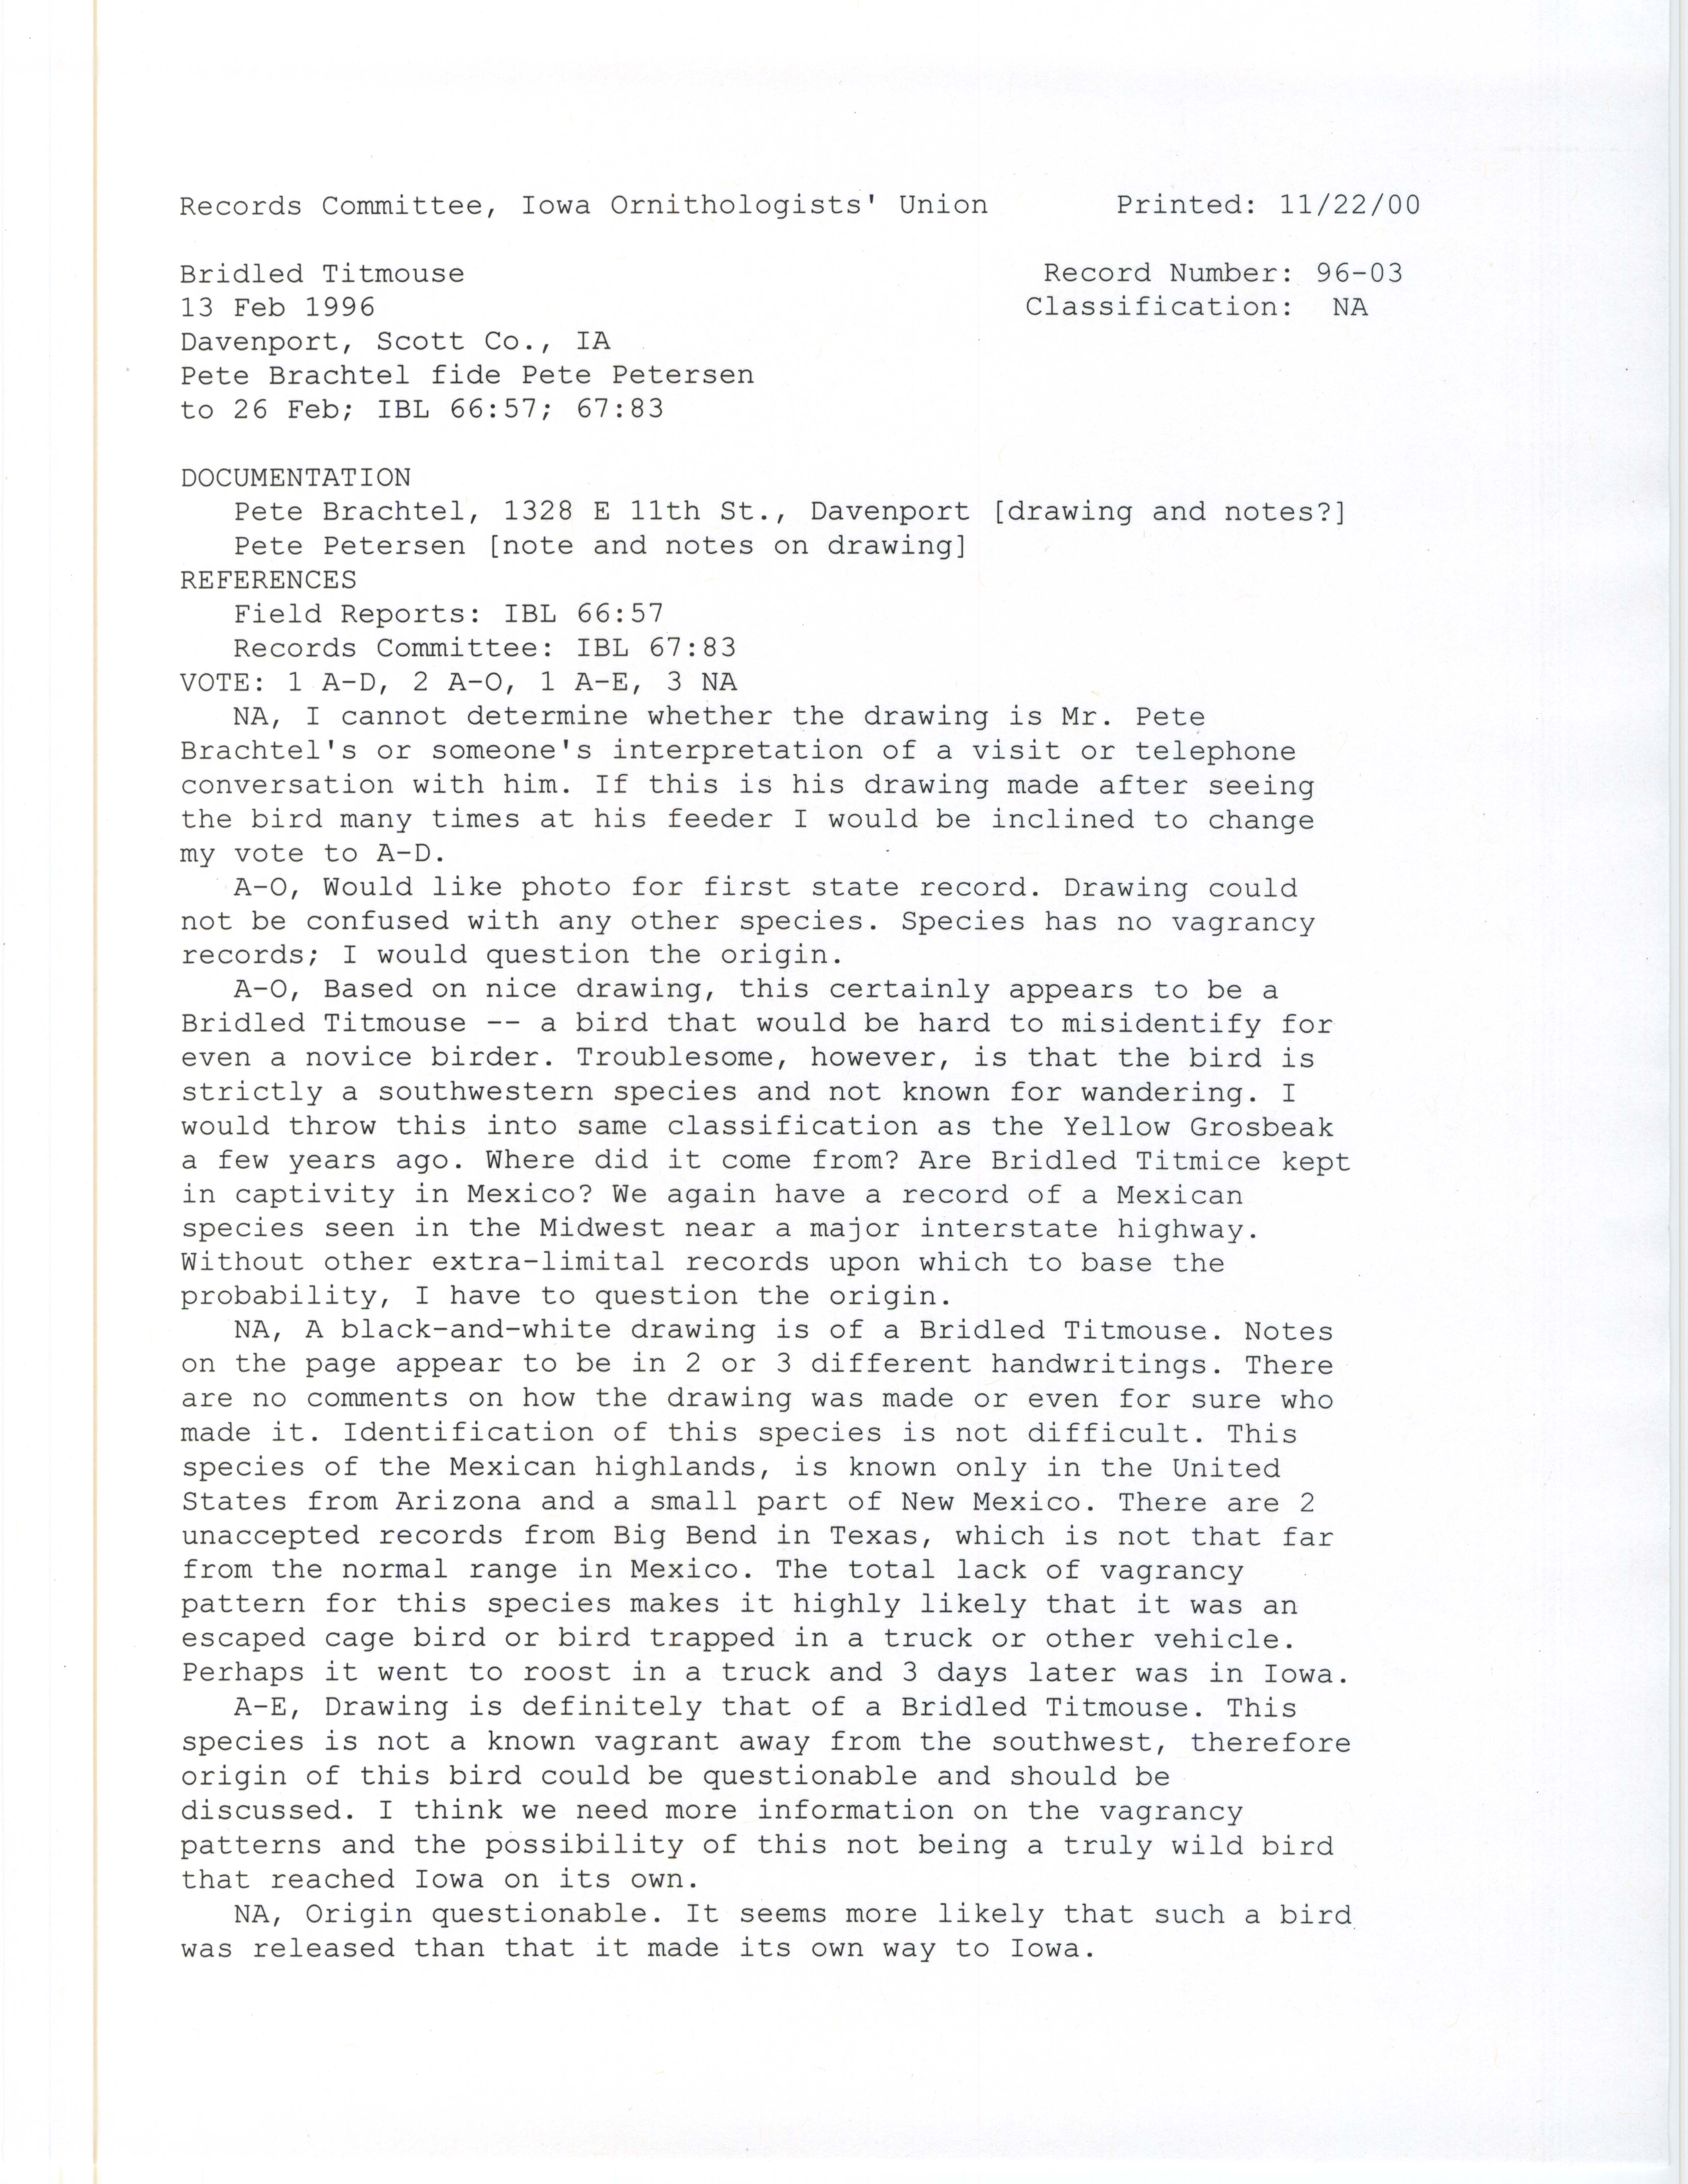 Records Committee review for rare bird sighting for Bridled Titmouse in Davenport in 1996